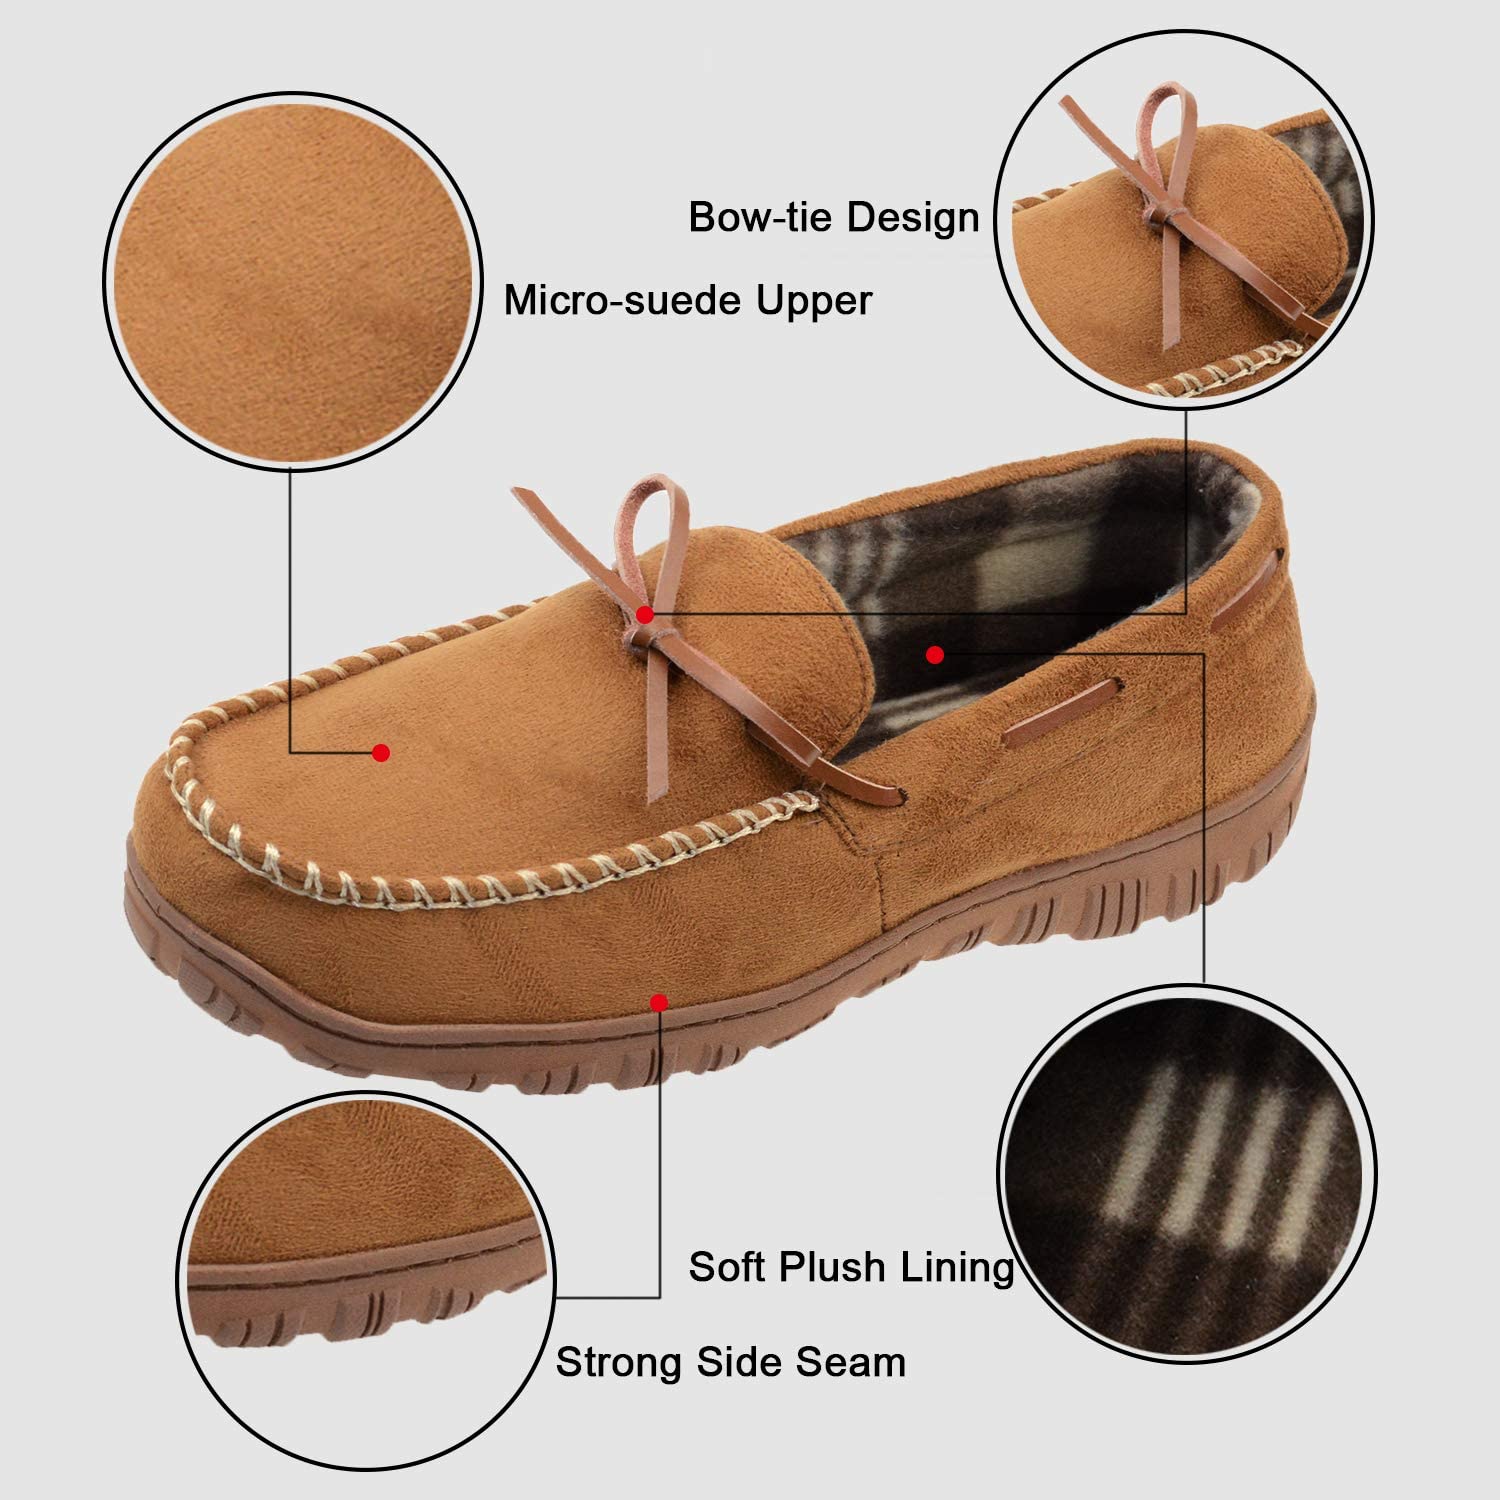 mens moccasin slippers with memory foam